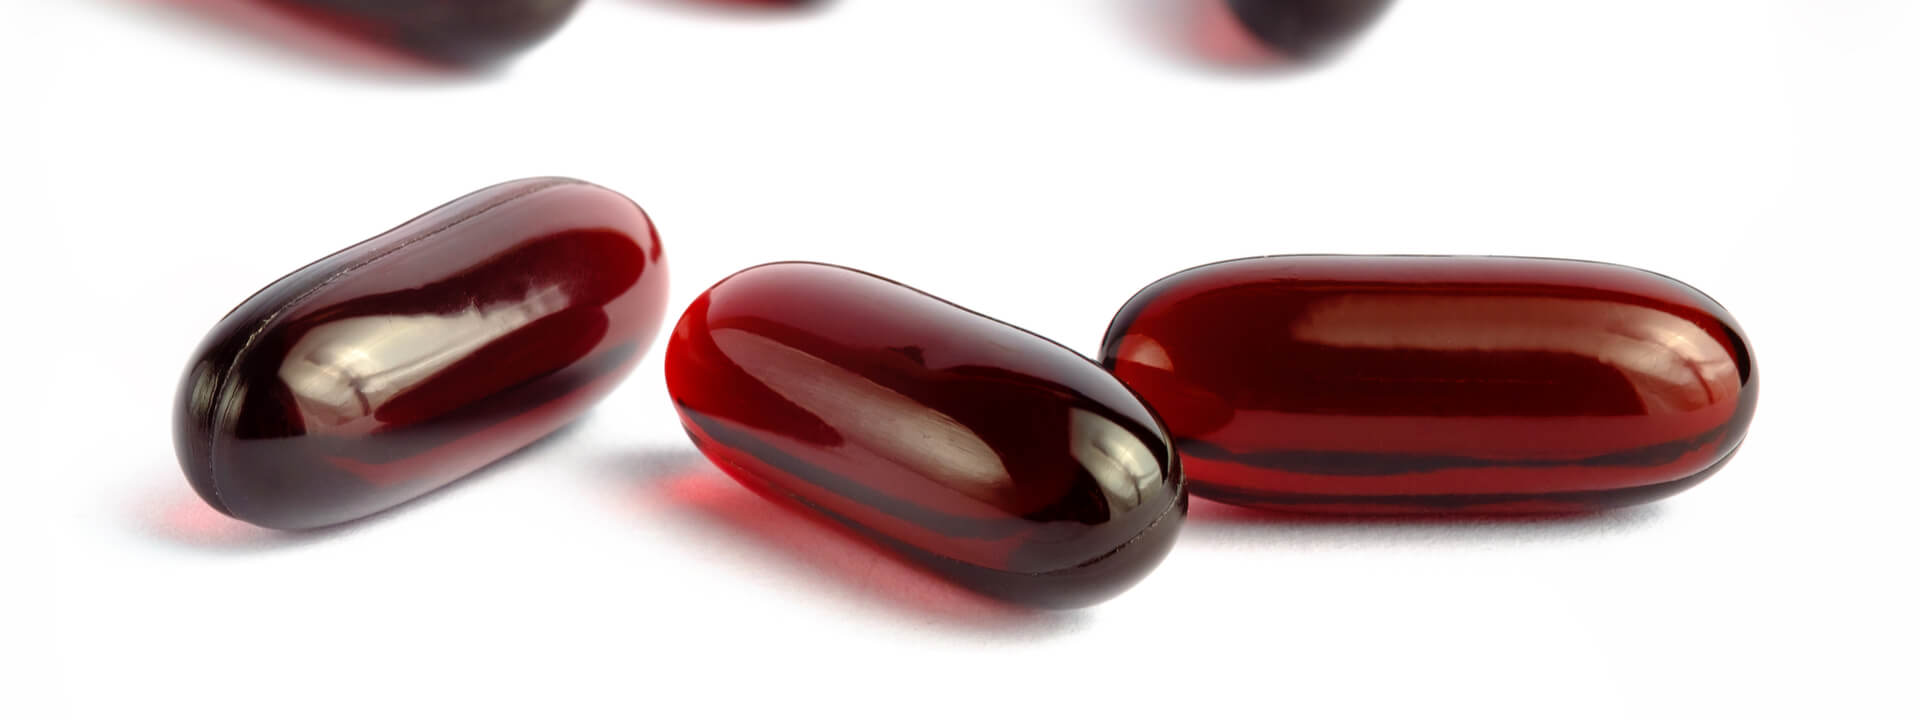 Astaxanthin and Omega-3 Fish Oil: A Potent Antioxidant